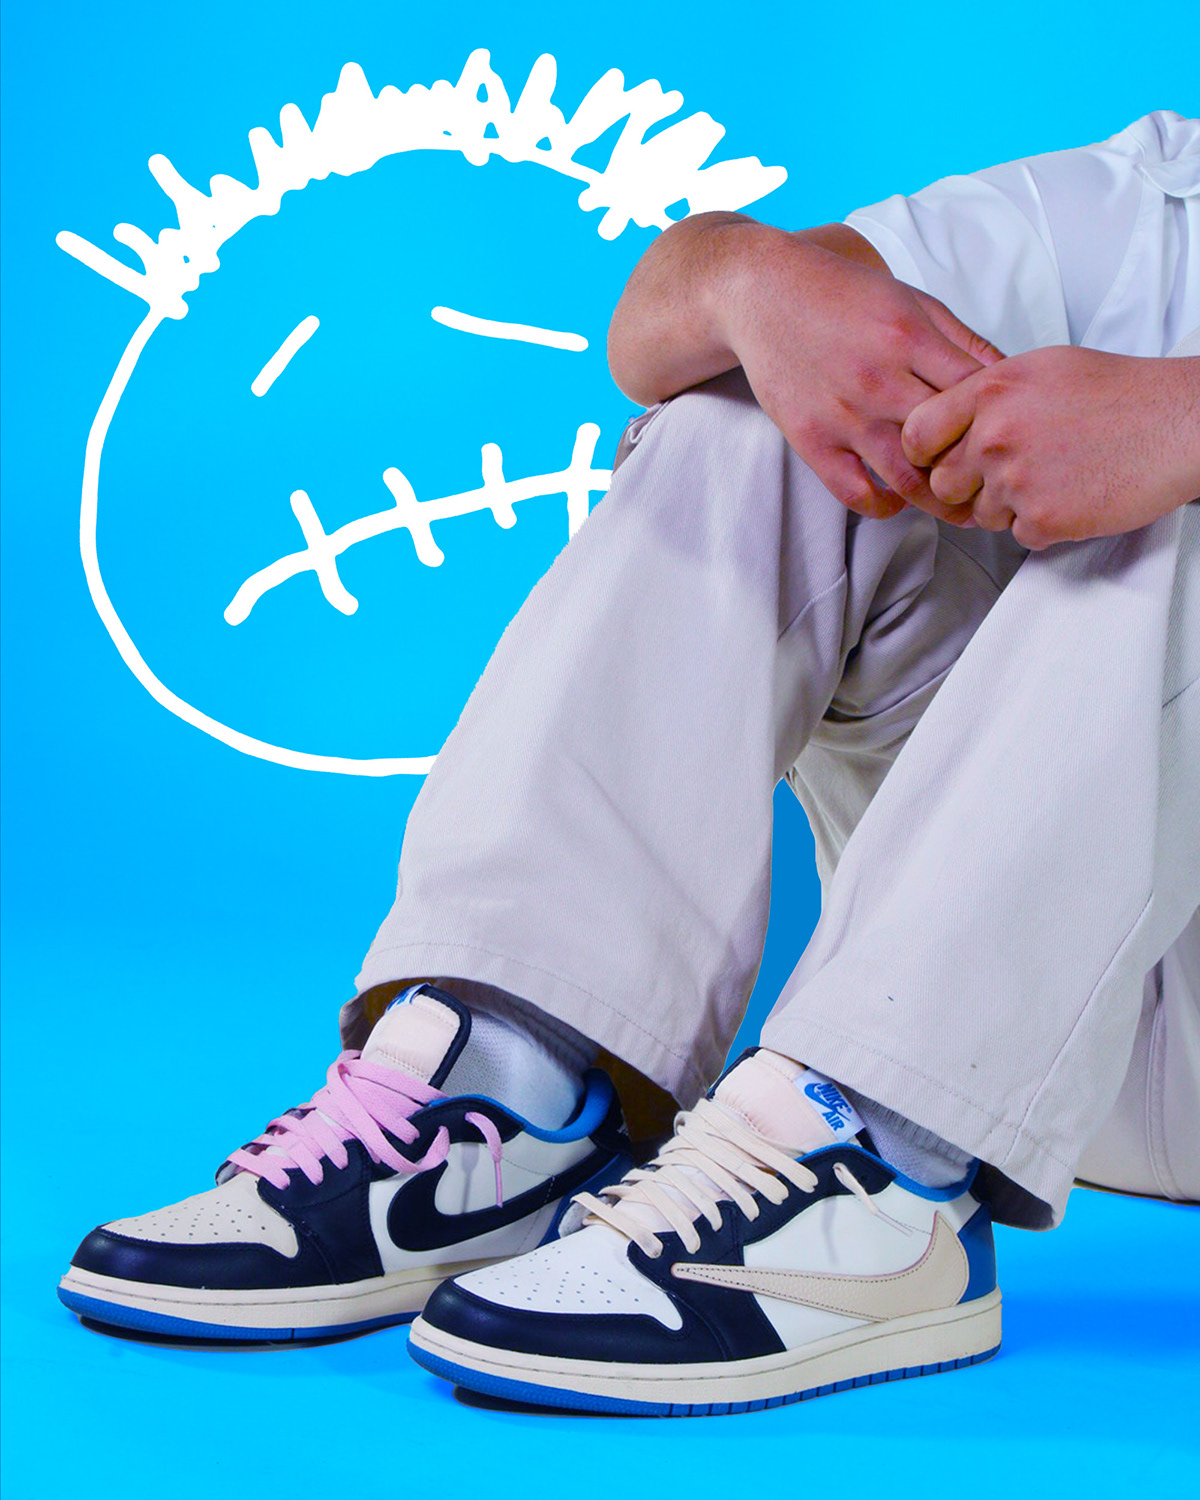 Clothing sneakers Nike jordan Fashion  Photography  graphic design  advertisement commercial